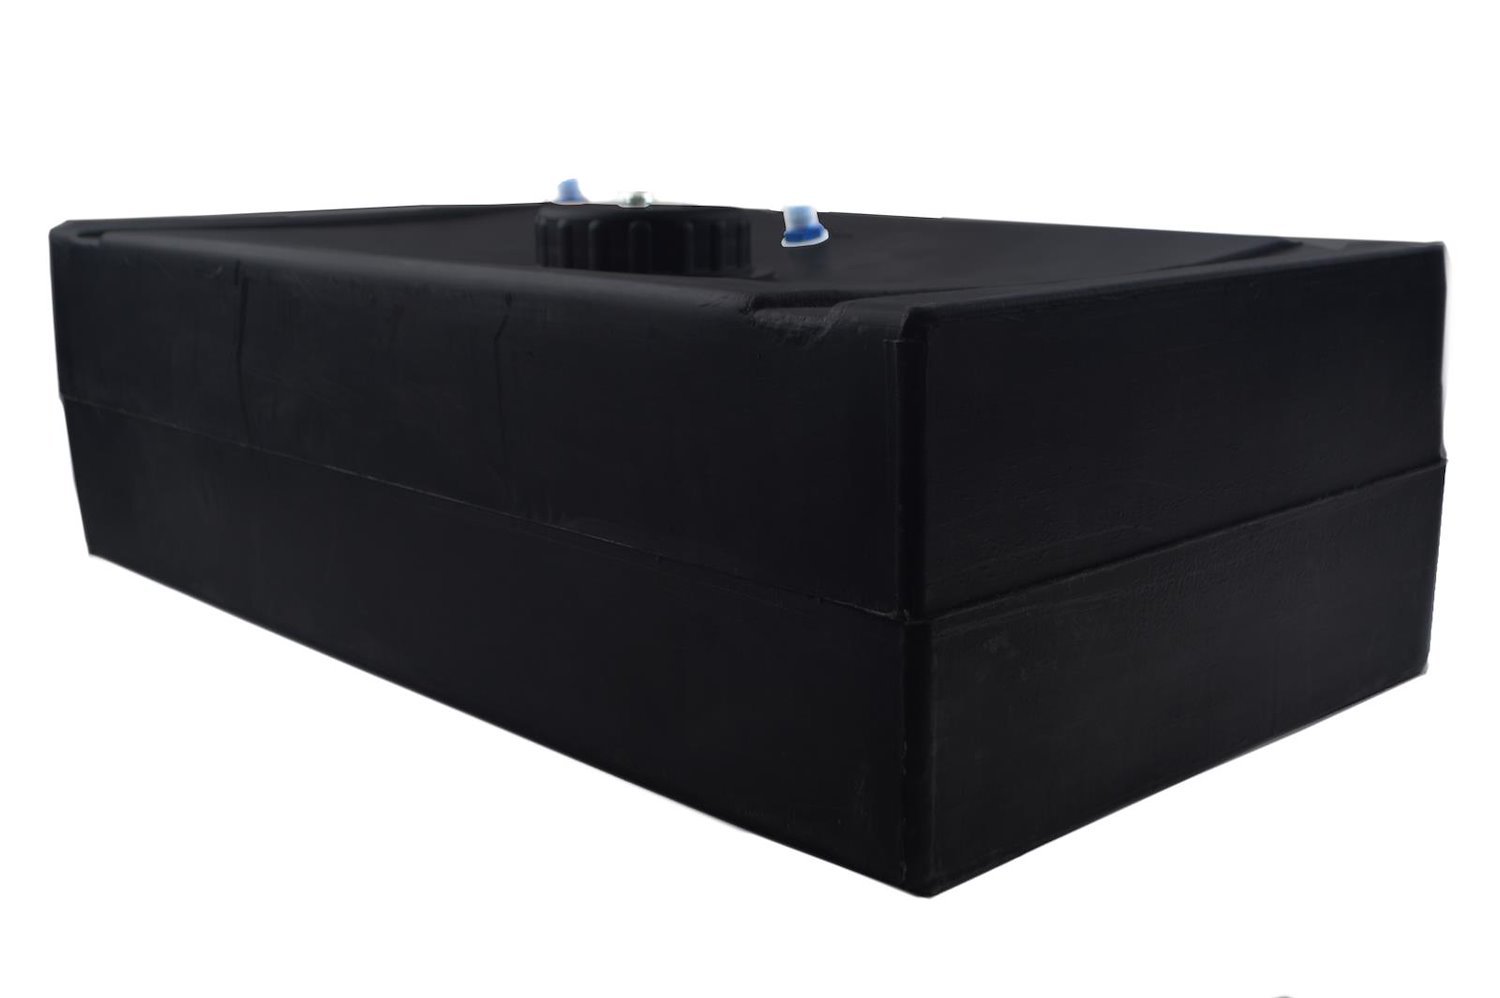 22 Gallon Long Economy Fuel Cell with Raised Plastic Filler Cap